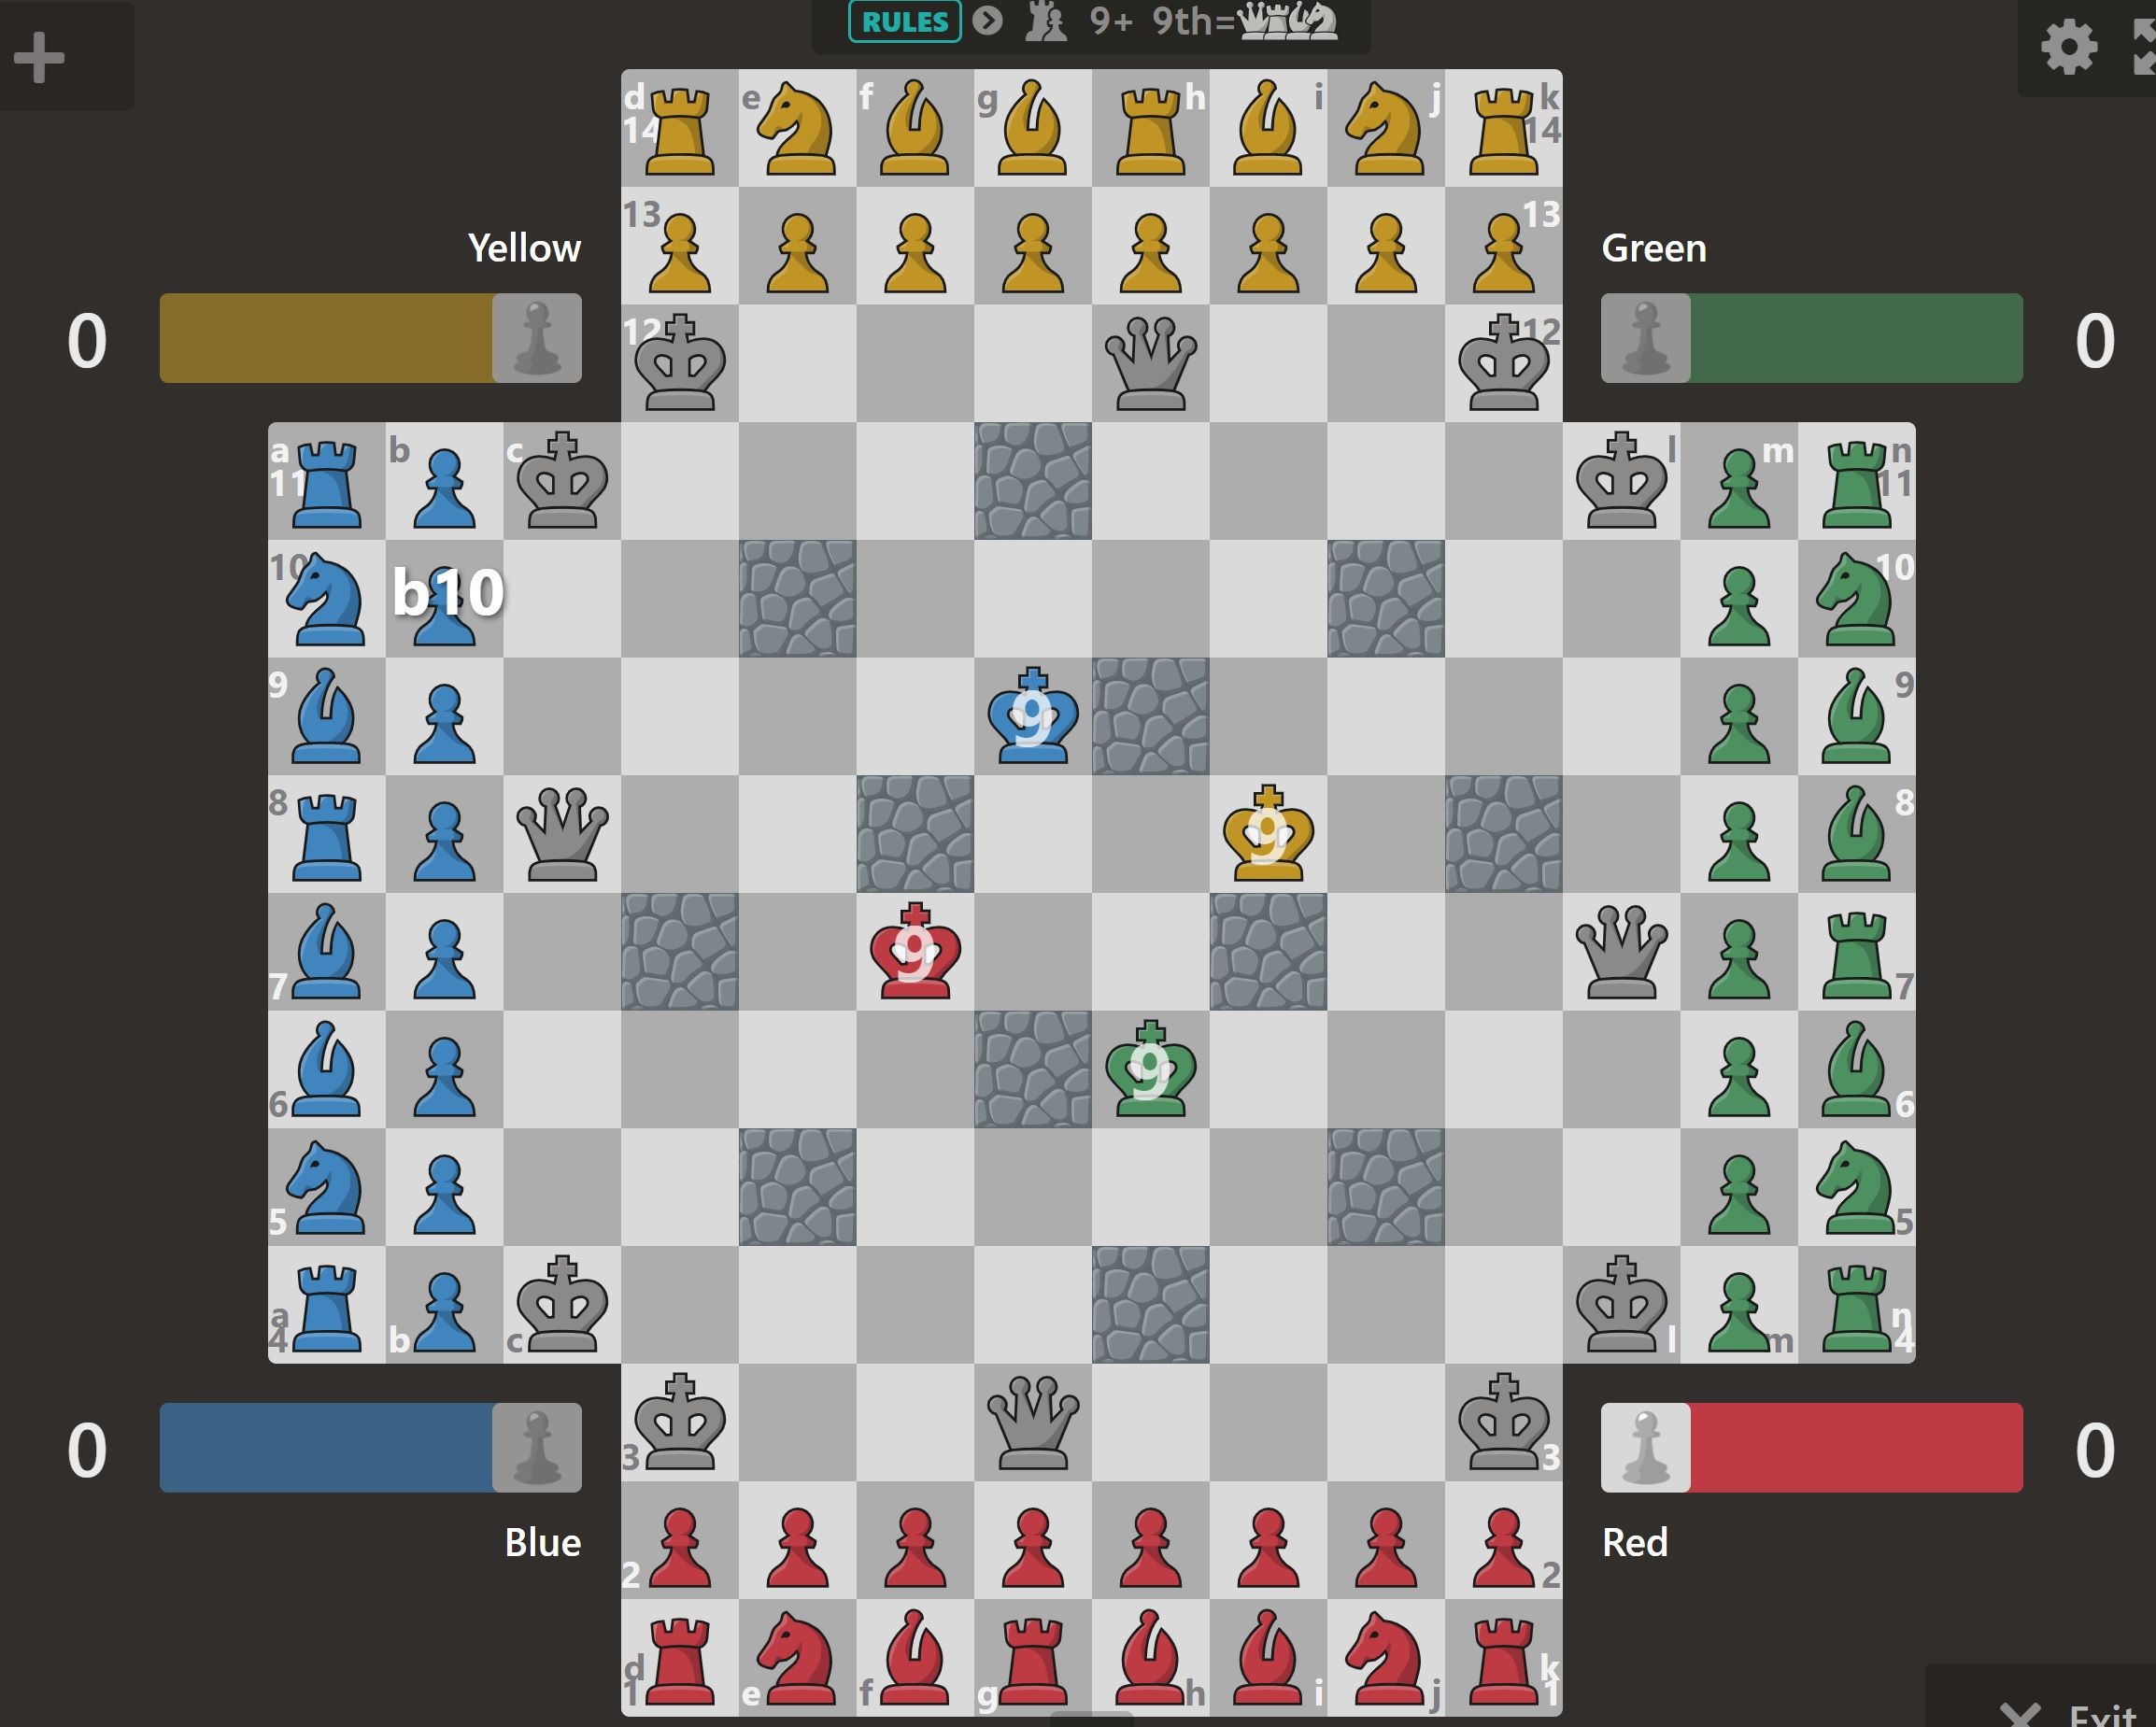 Setting up a custom position - Chess Forums 